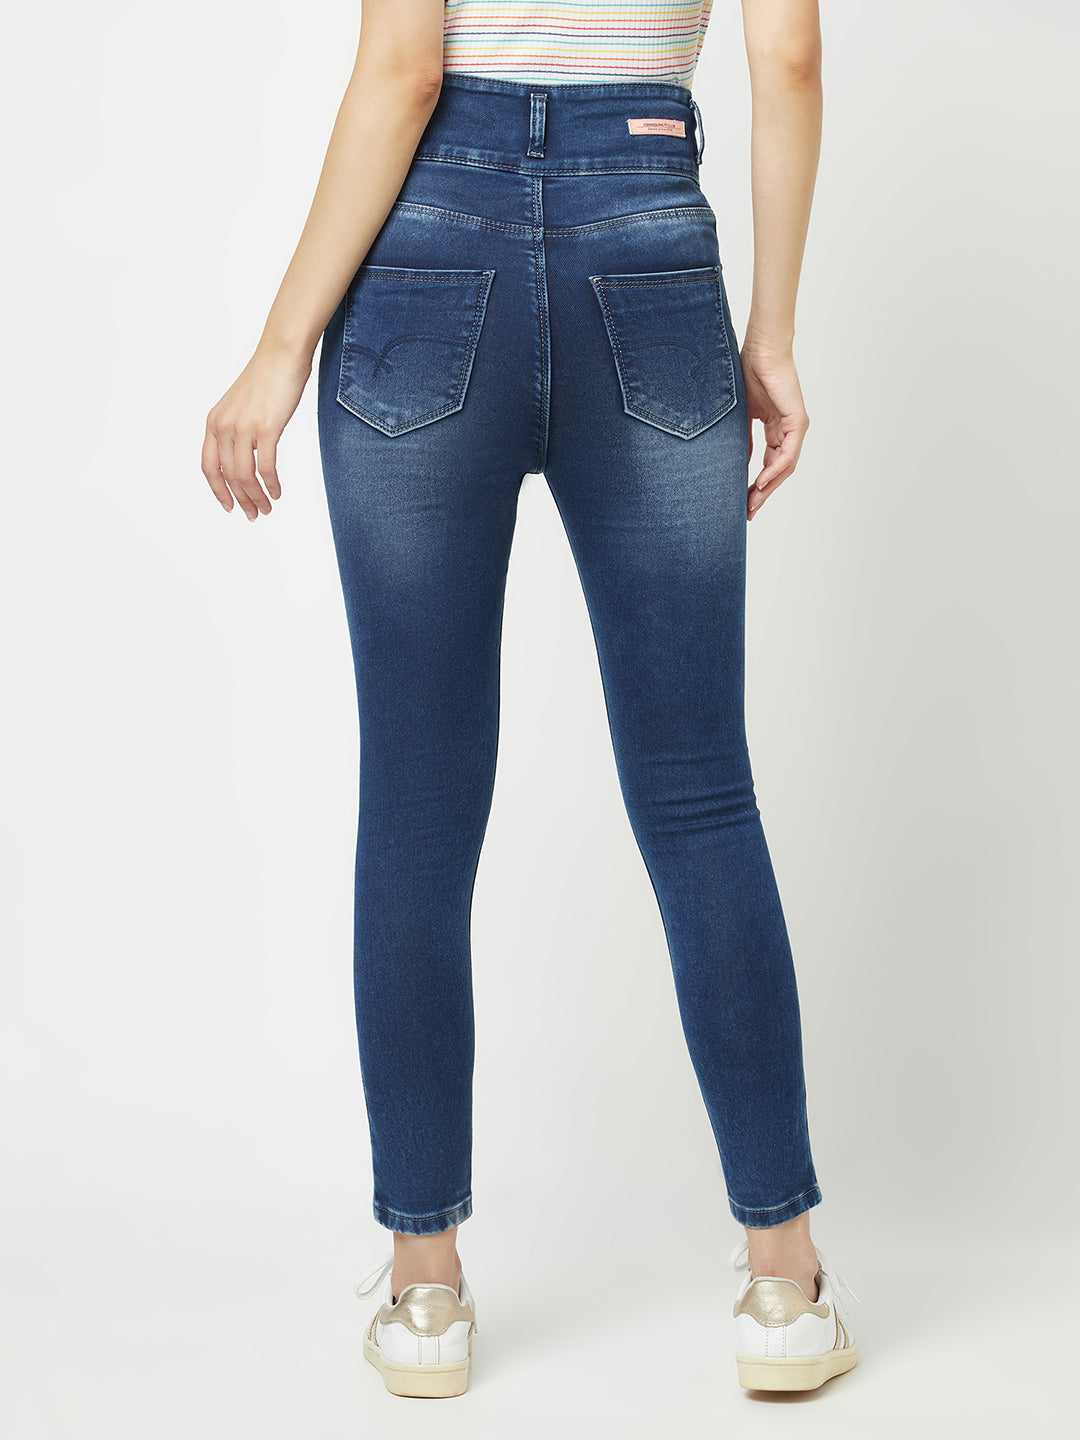  Navy Blue Light-Wash High-Waisted Jeans